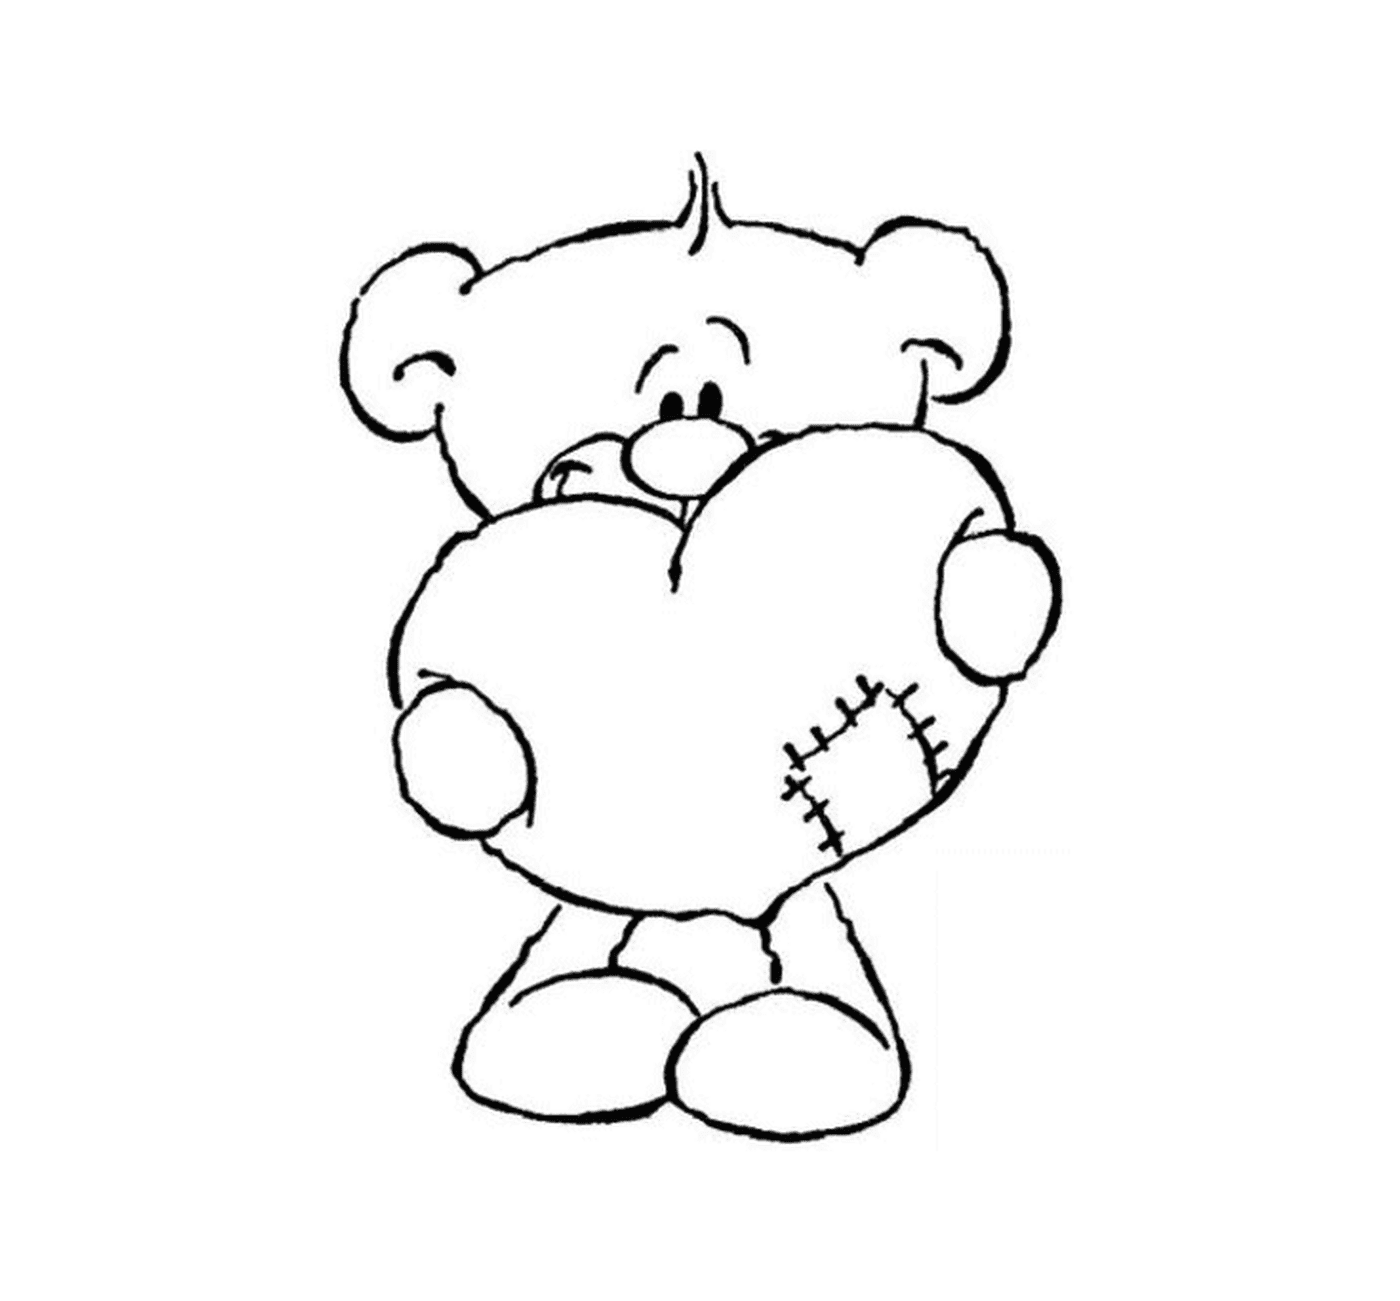  A teddy bear holding a heart in his hands 